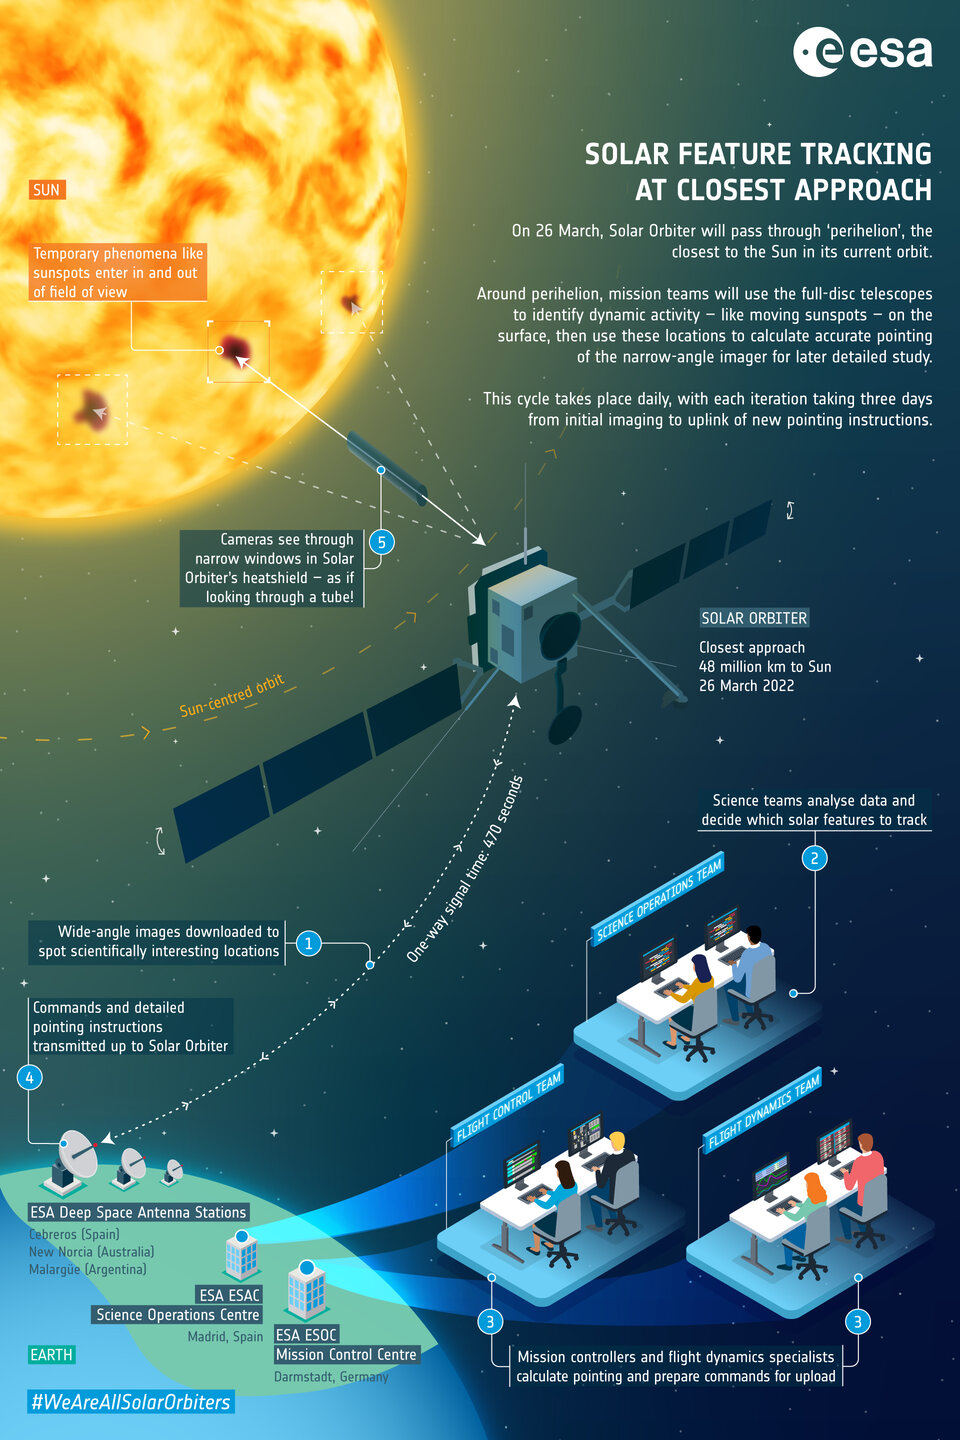 An example of Solar Orbiter’s complex operations during perihelion